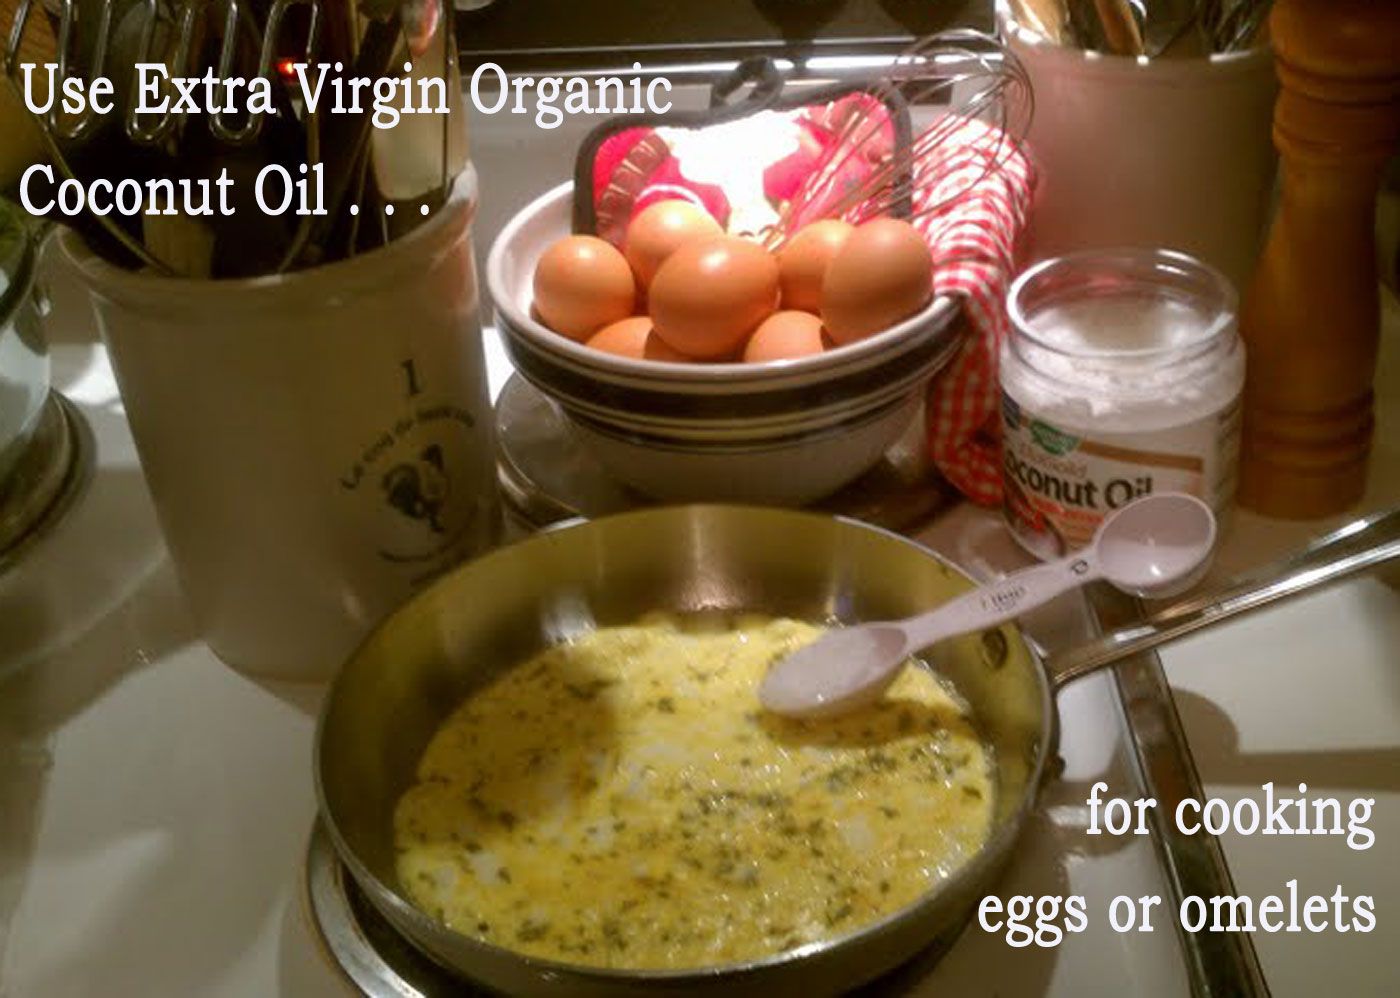 Use coconut oil instead of vegetable oils to saute ...